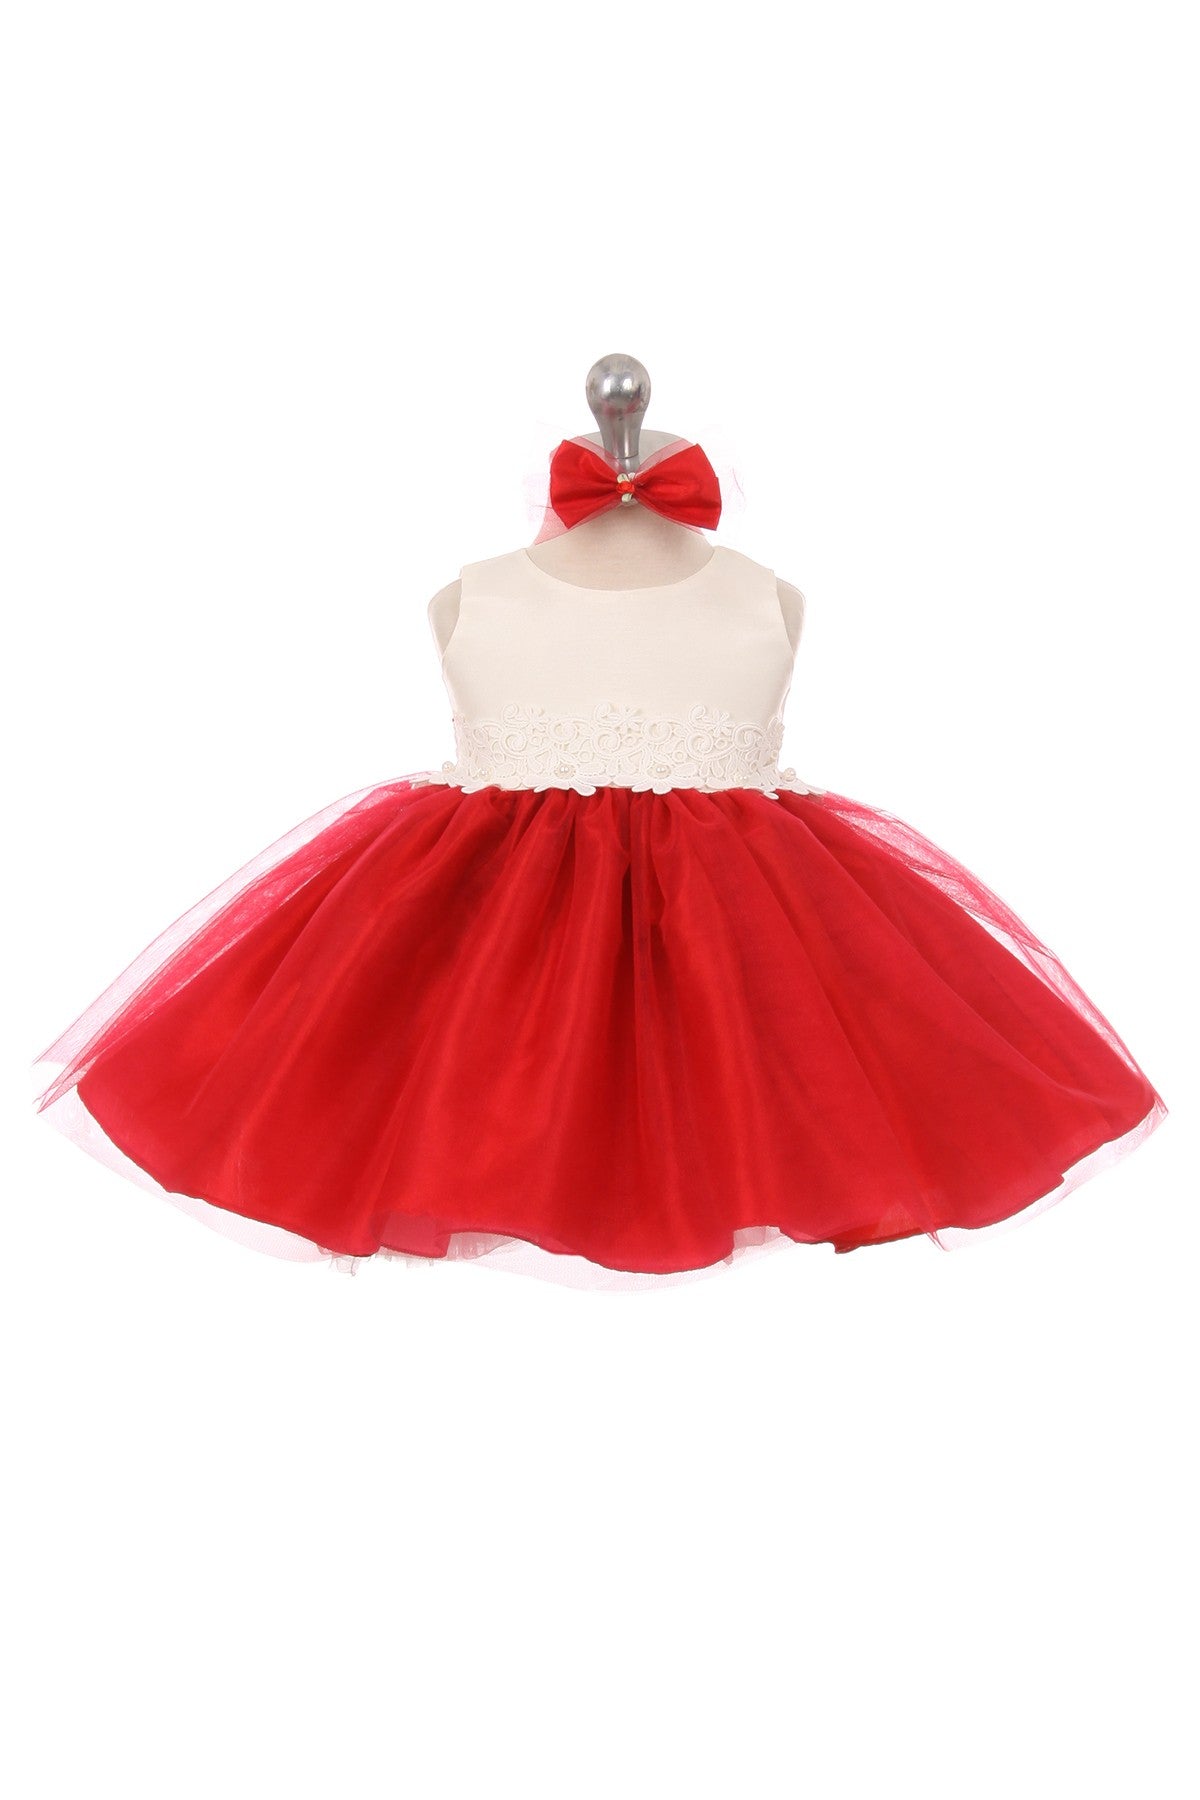 Shalloon Tulle Dress with Lace Sash 3566